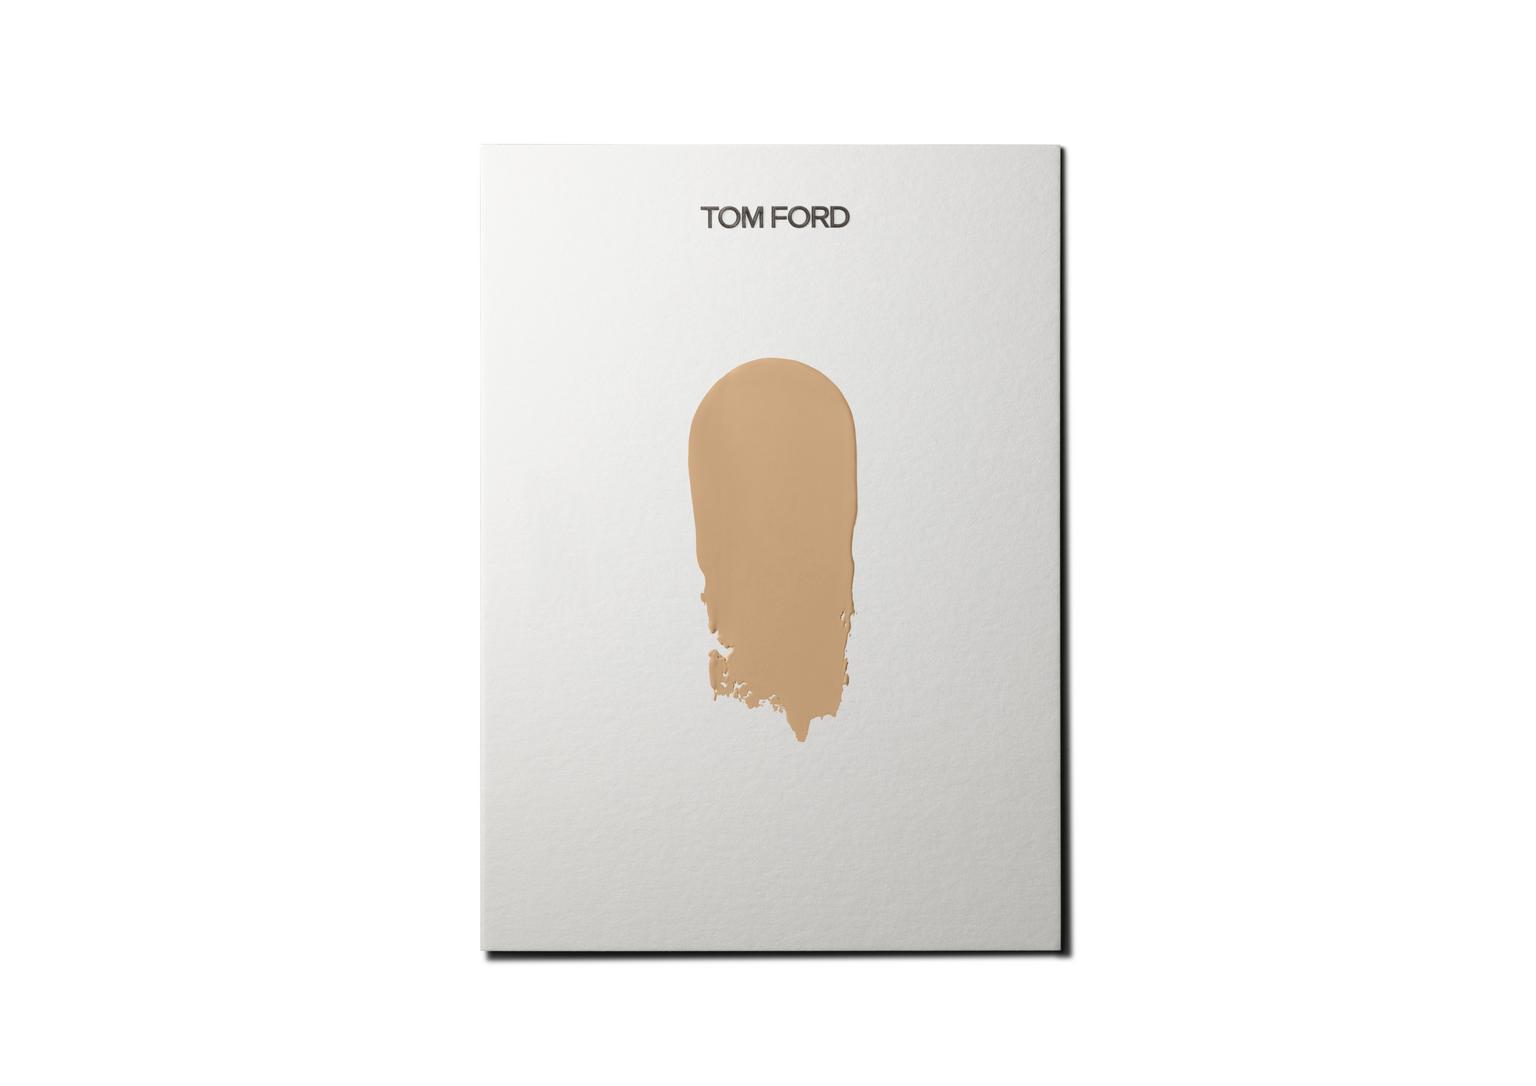 Tomford-TRACELESS FOUNDATION STICK (5.5 BISQUE)